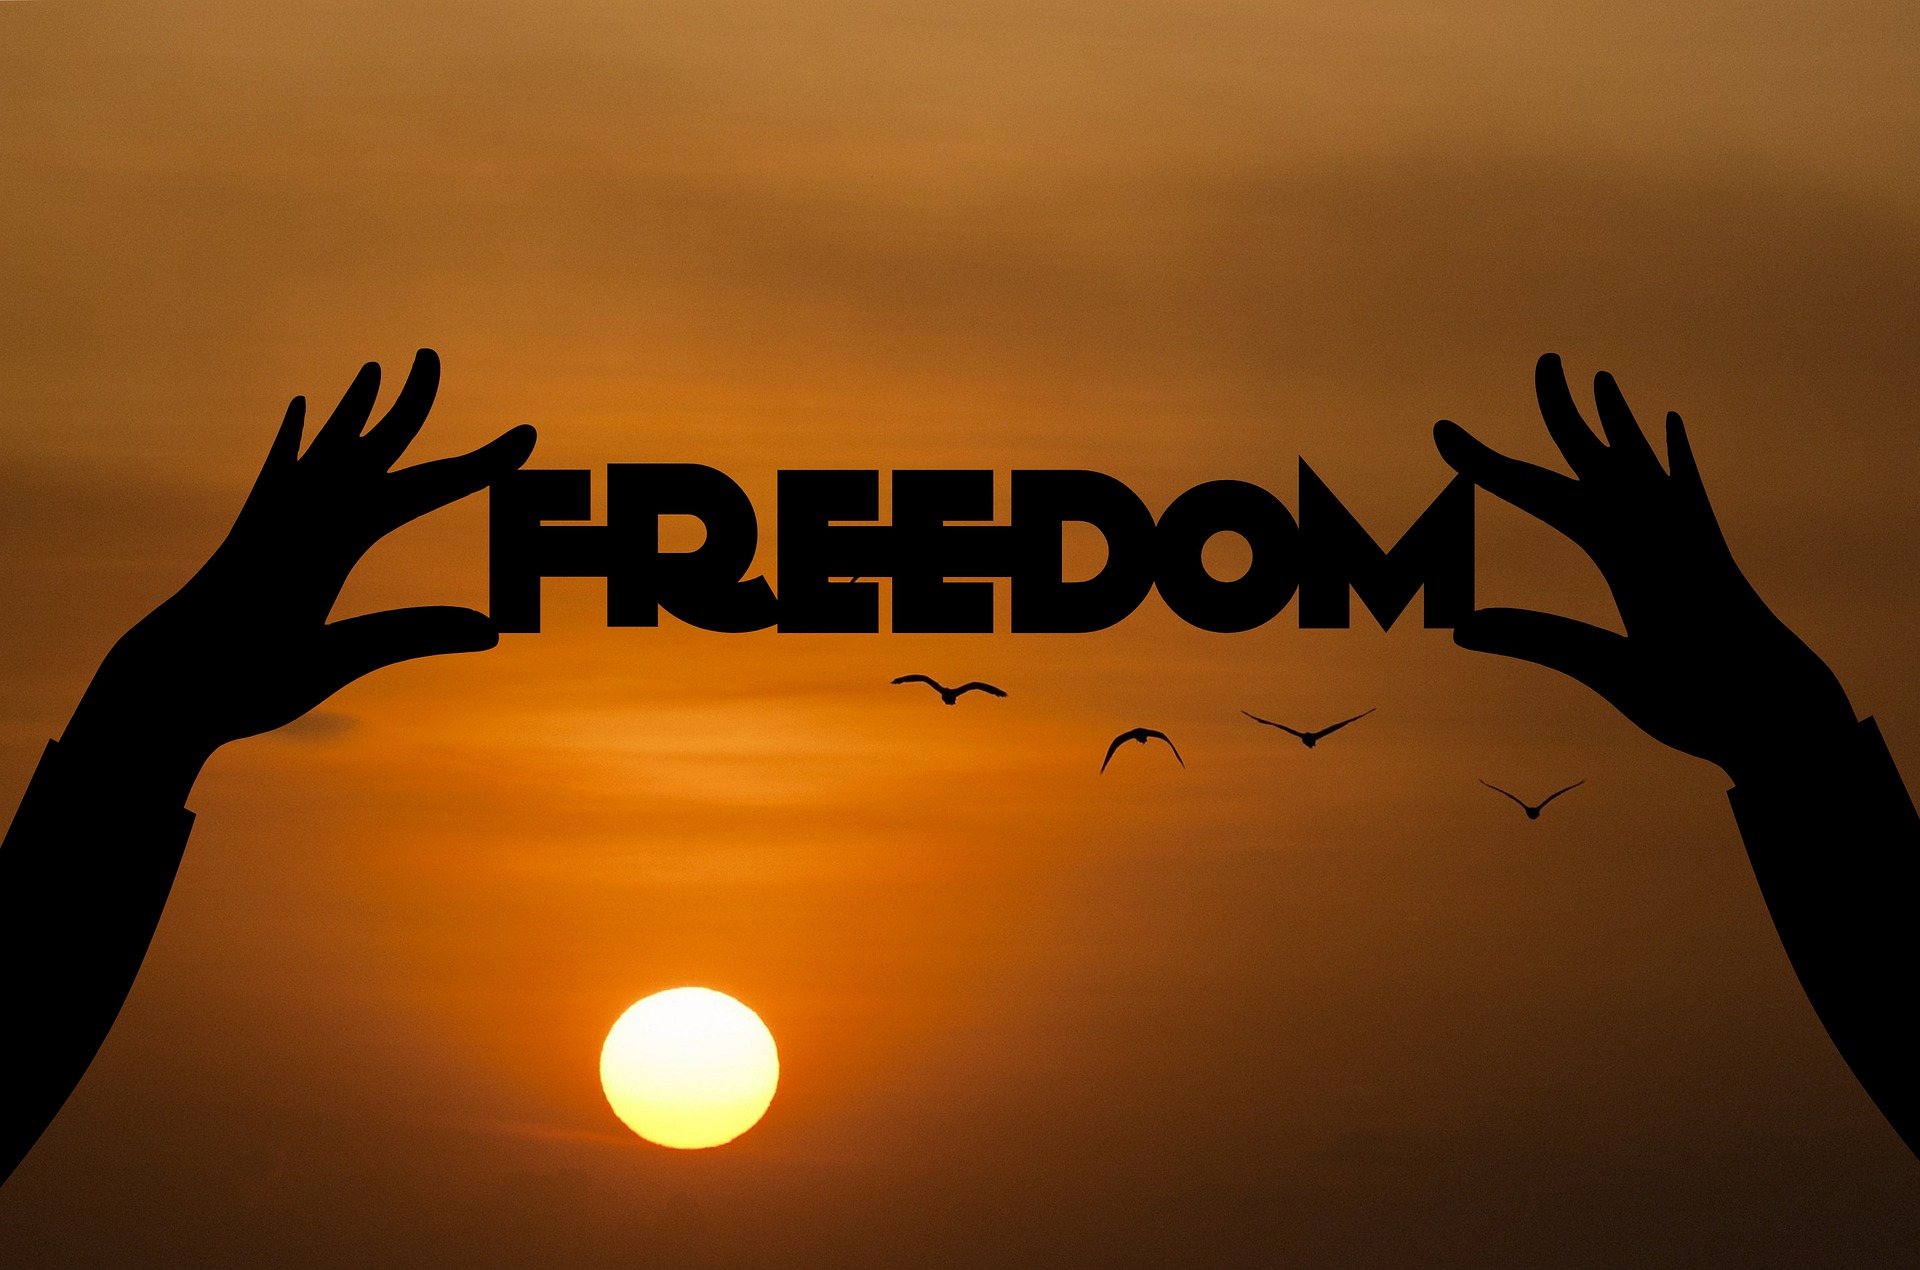 Freedom: The Open Window for the Sunlight of the Human Spirit ...